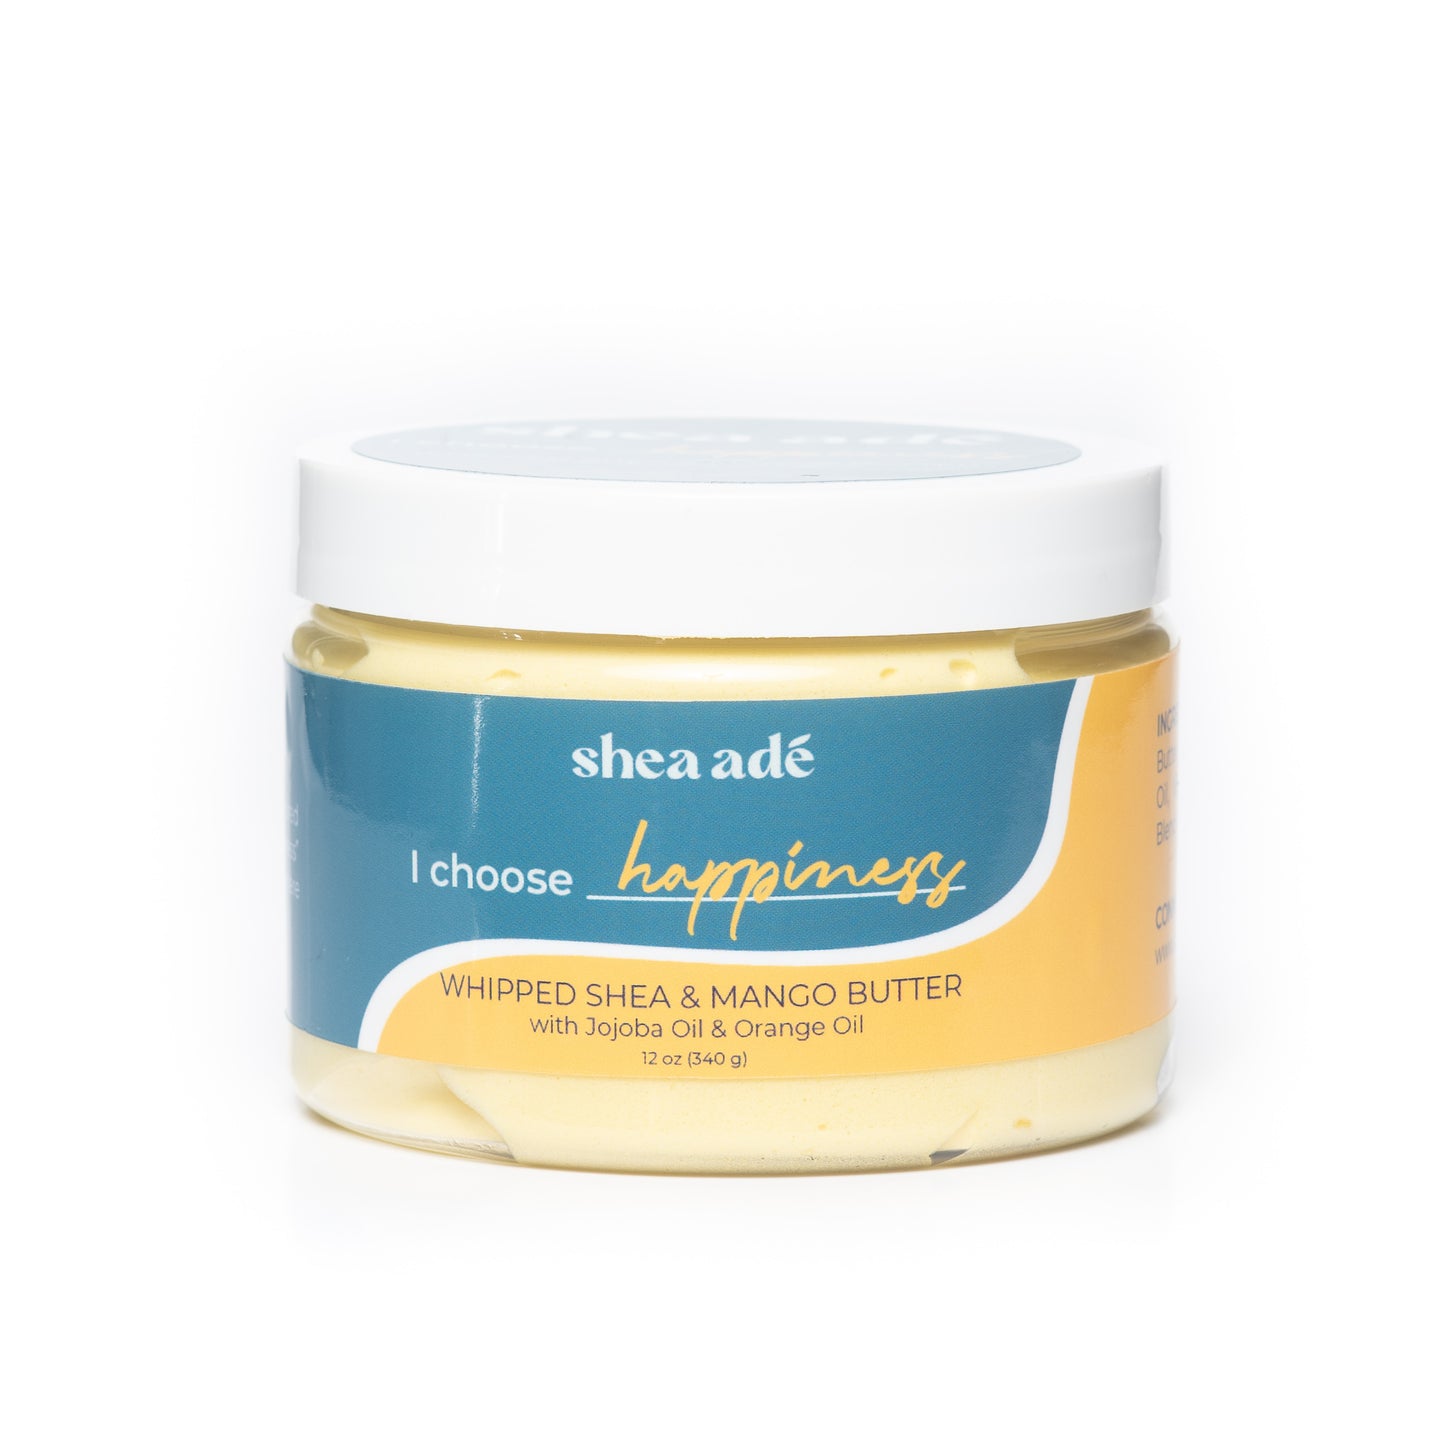 "I choose happiness!" Whipped Body Butter